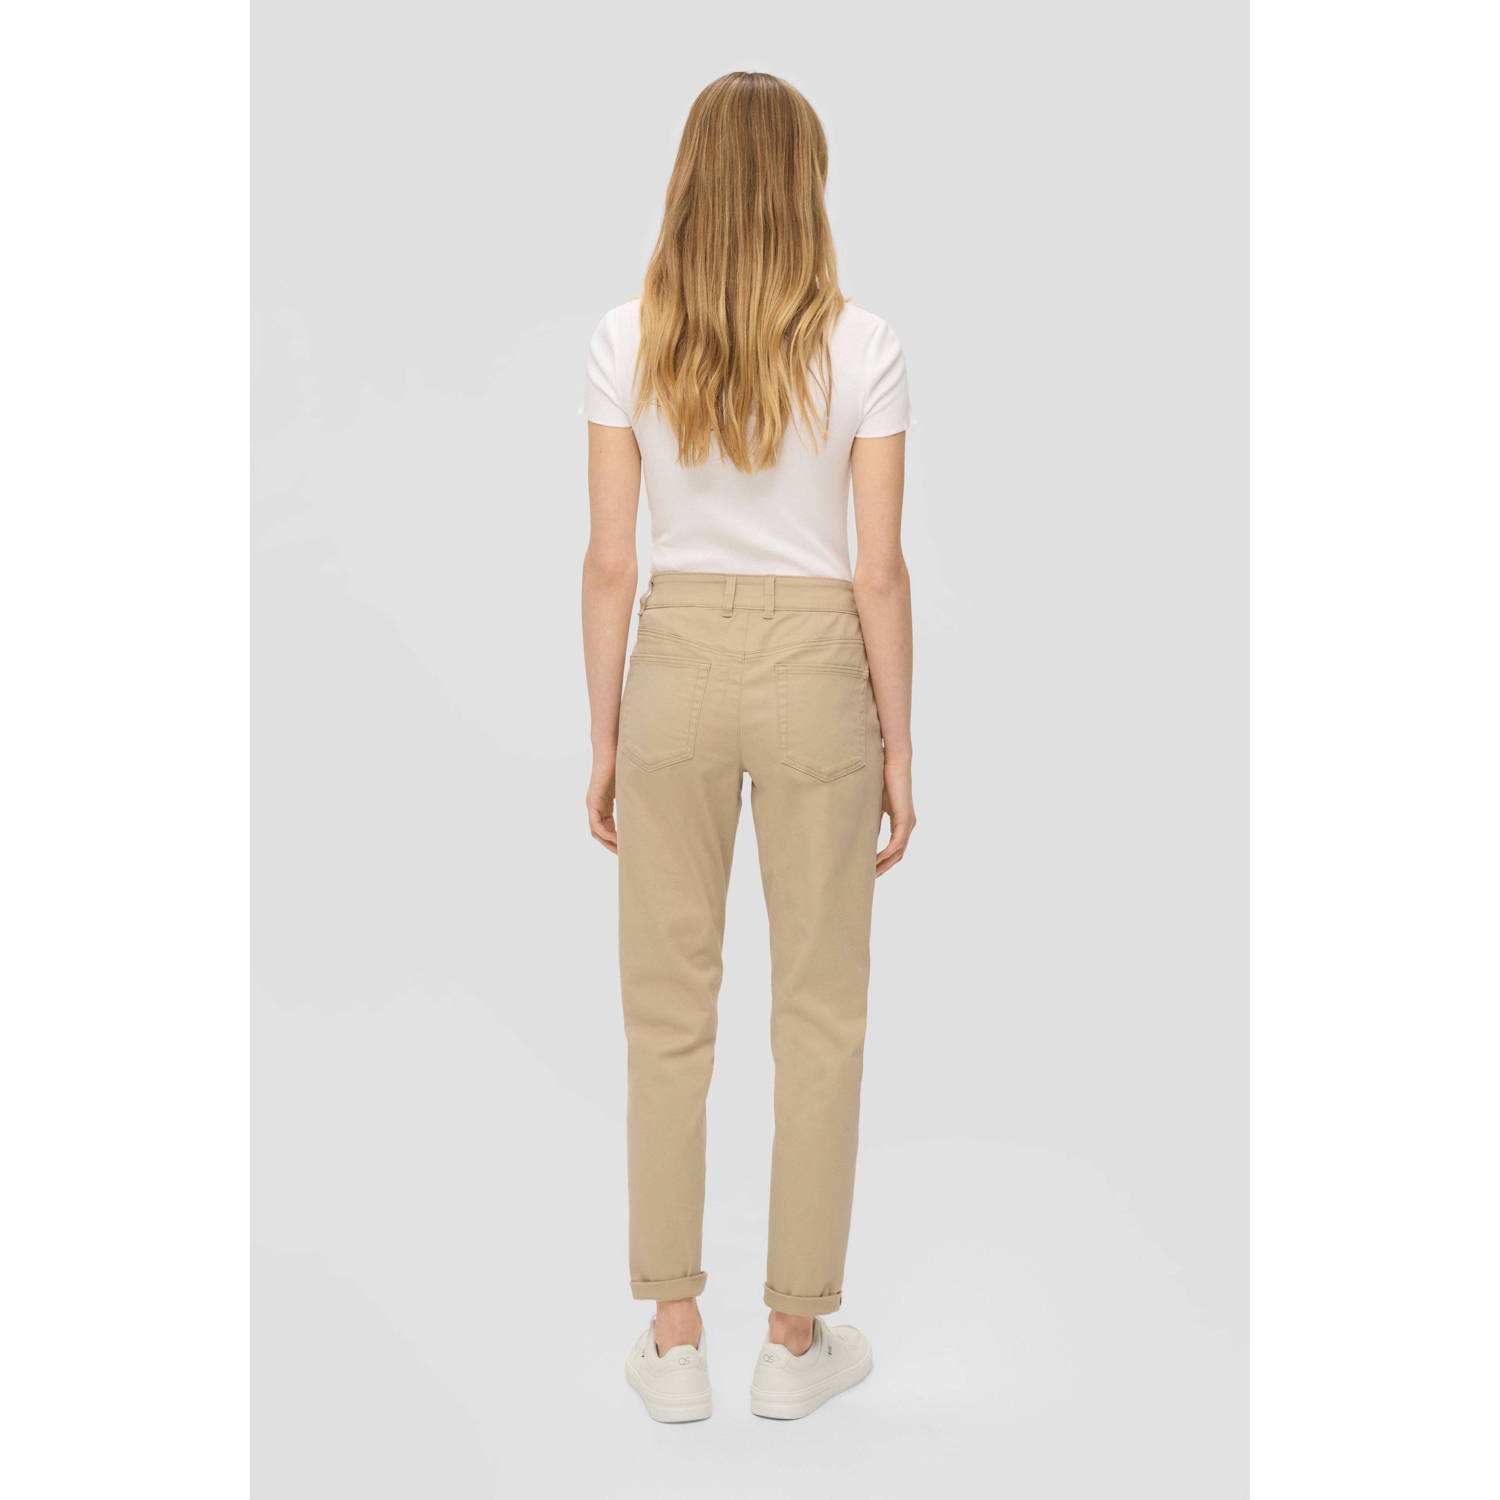 Q S by s.Oliver regular fit chino beige